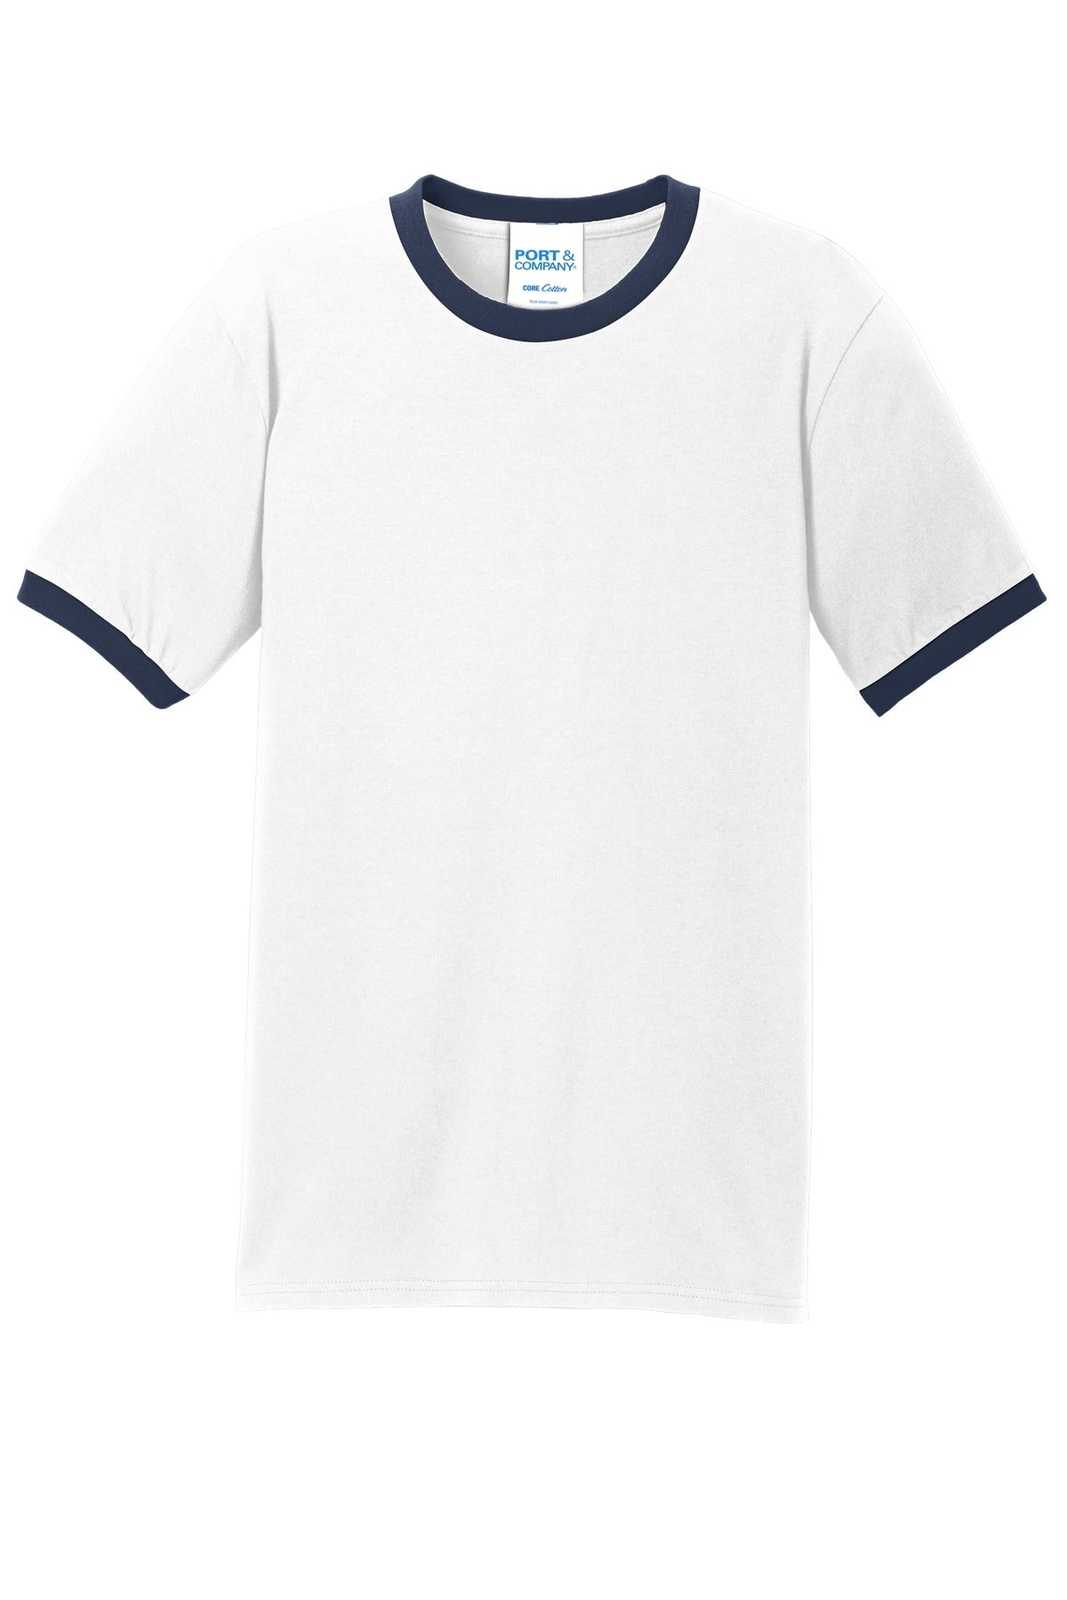 Port &amp; Company PC54R Core Cotton Ringer Tee - White Navy - HIT a Double - 5